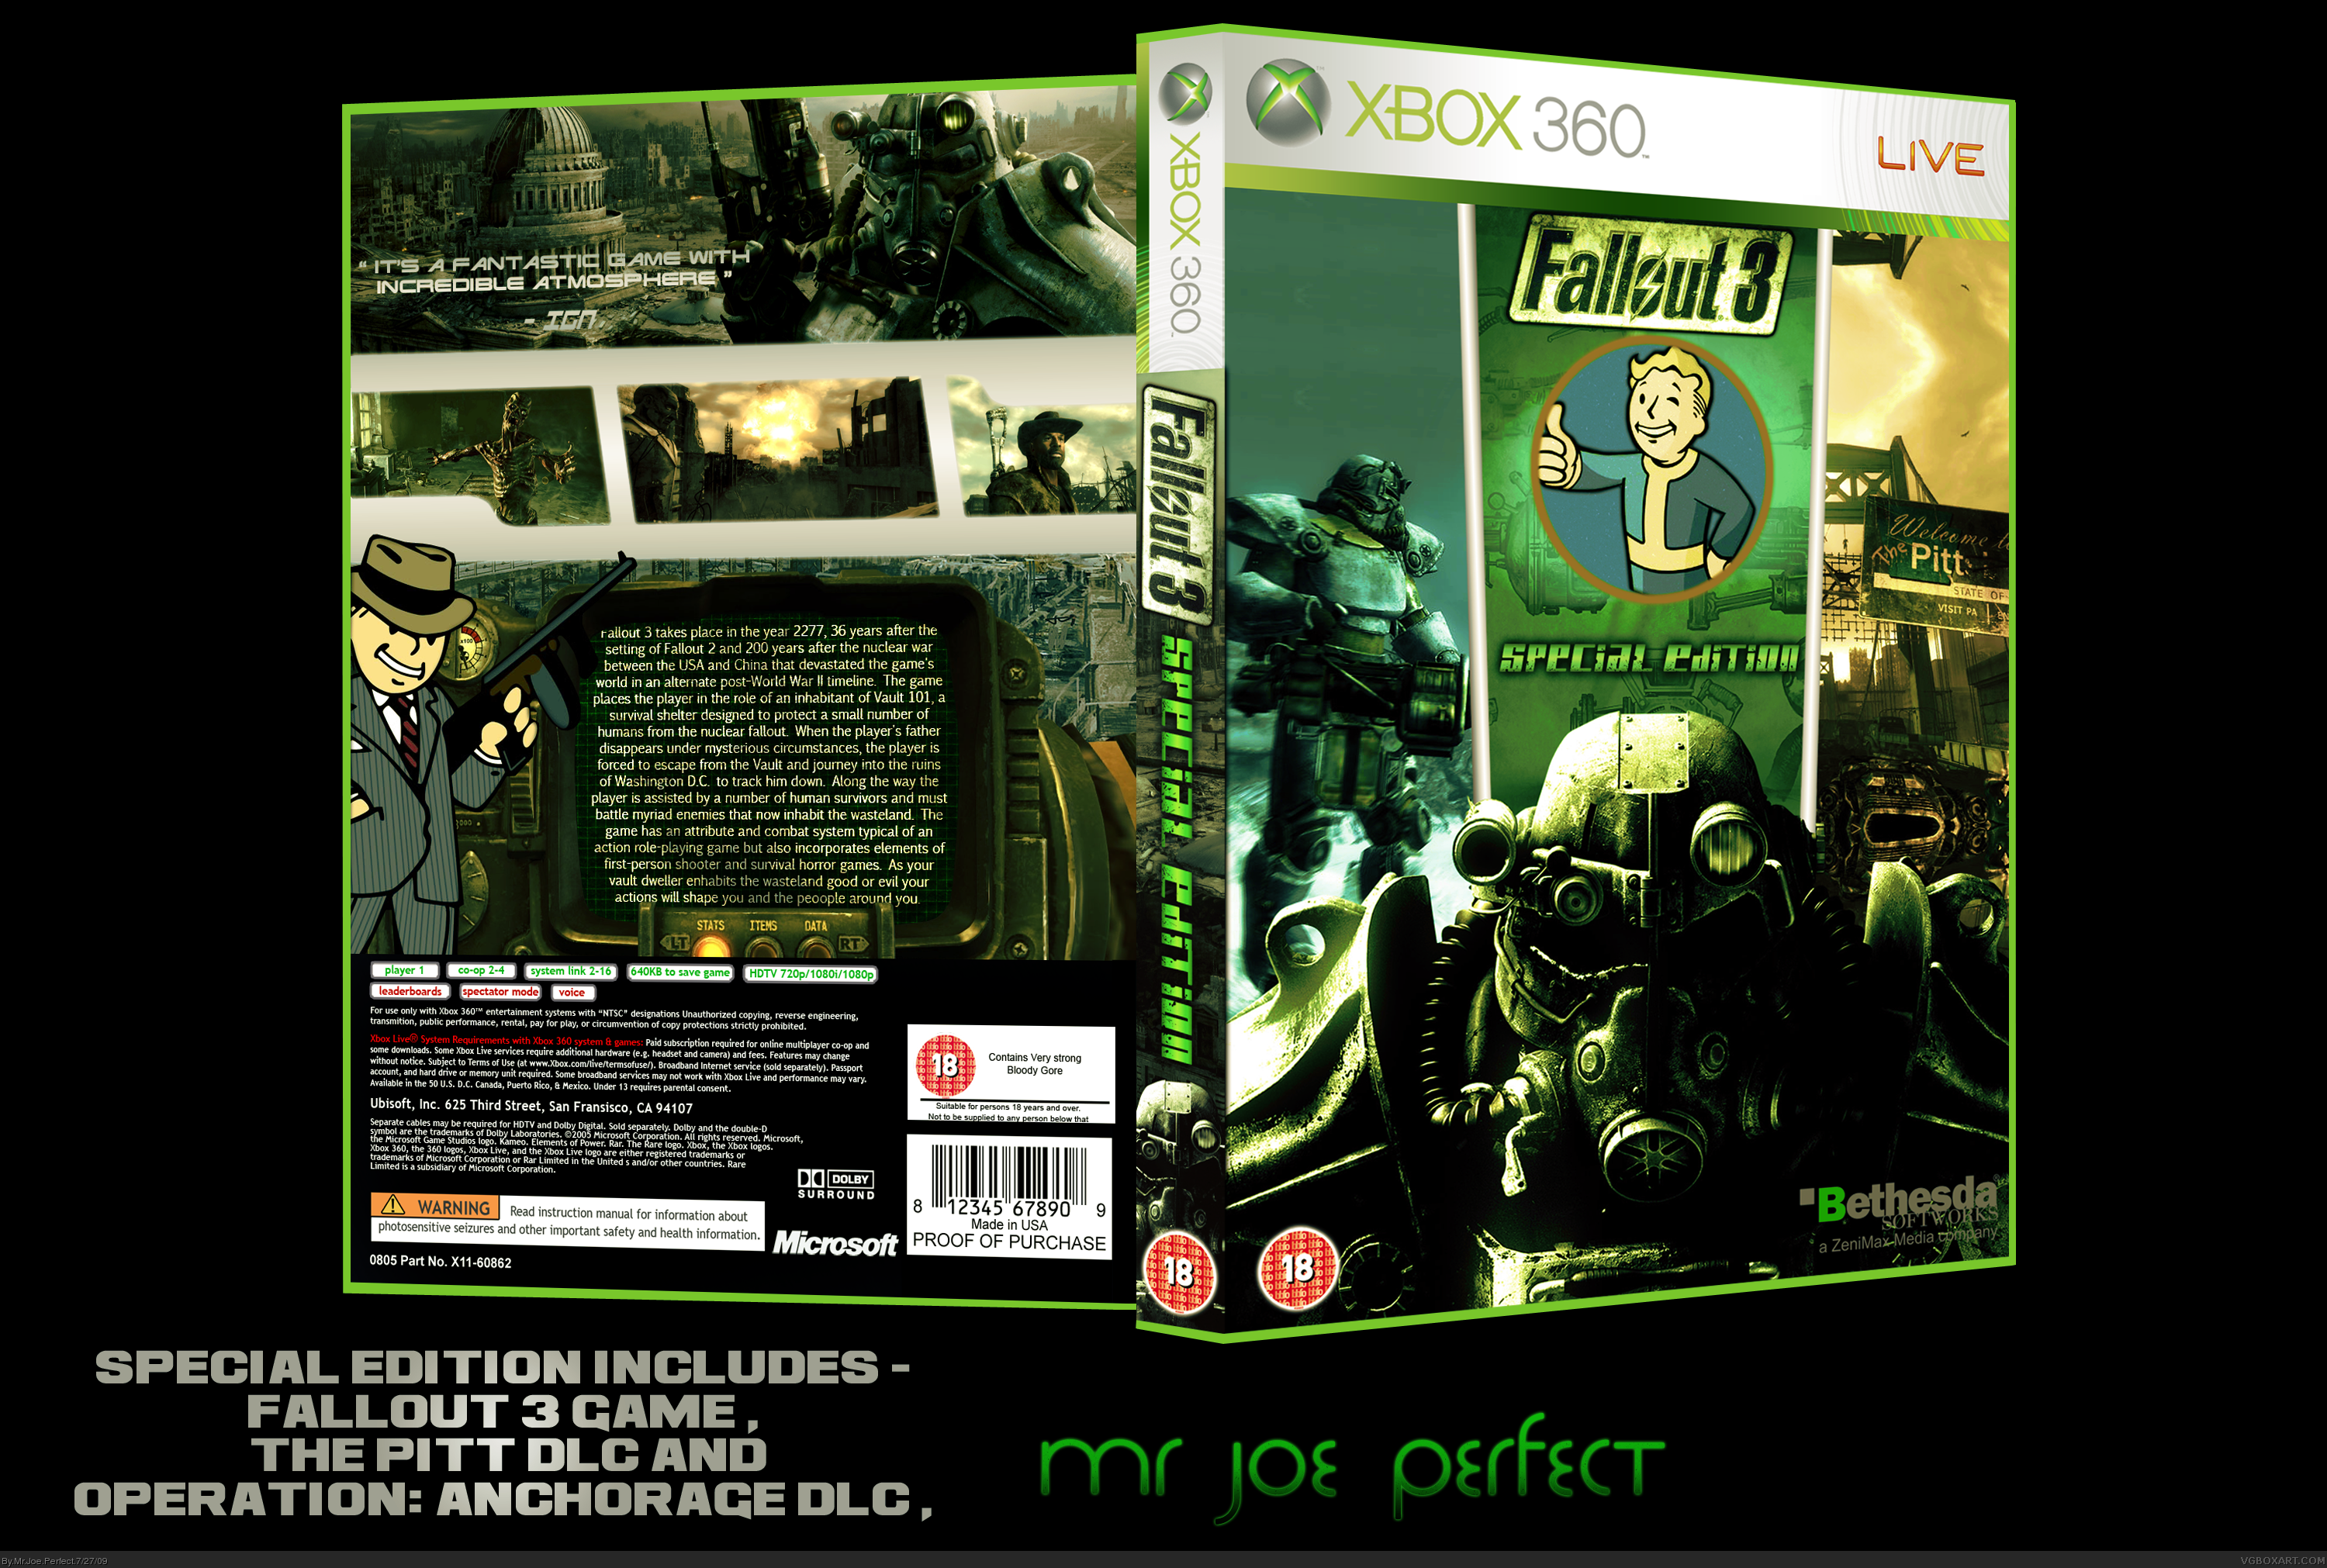 Fallout 3 Special Edition box cover